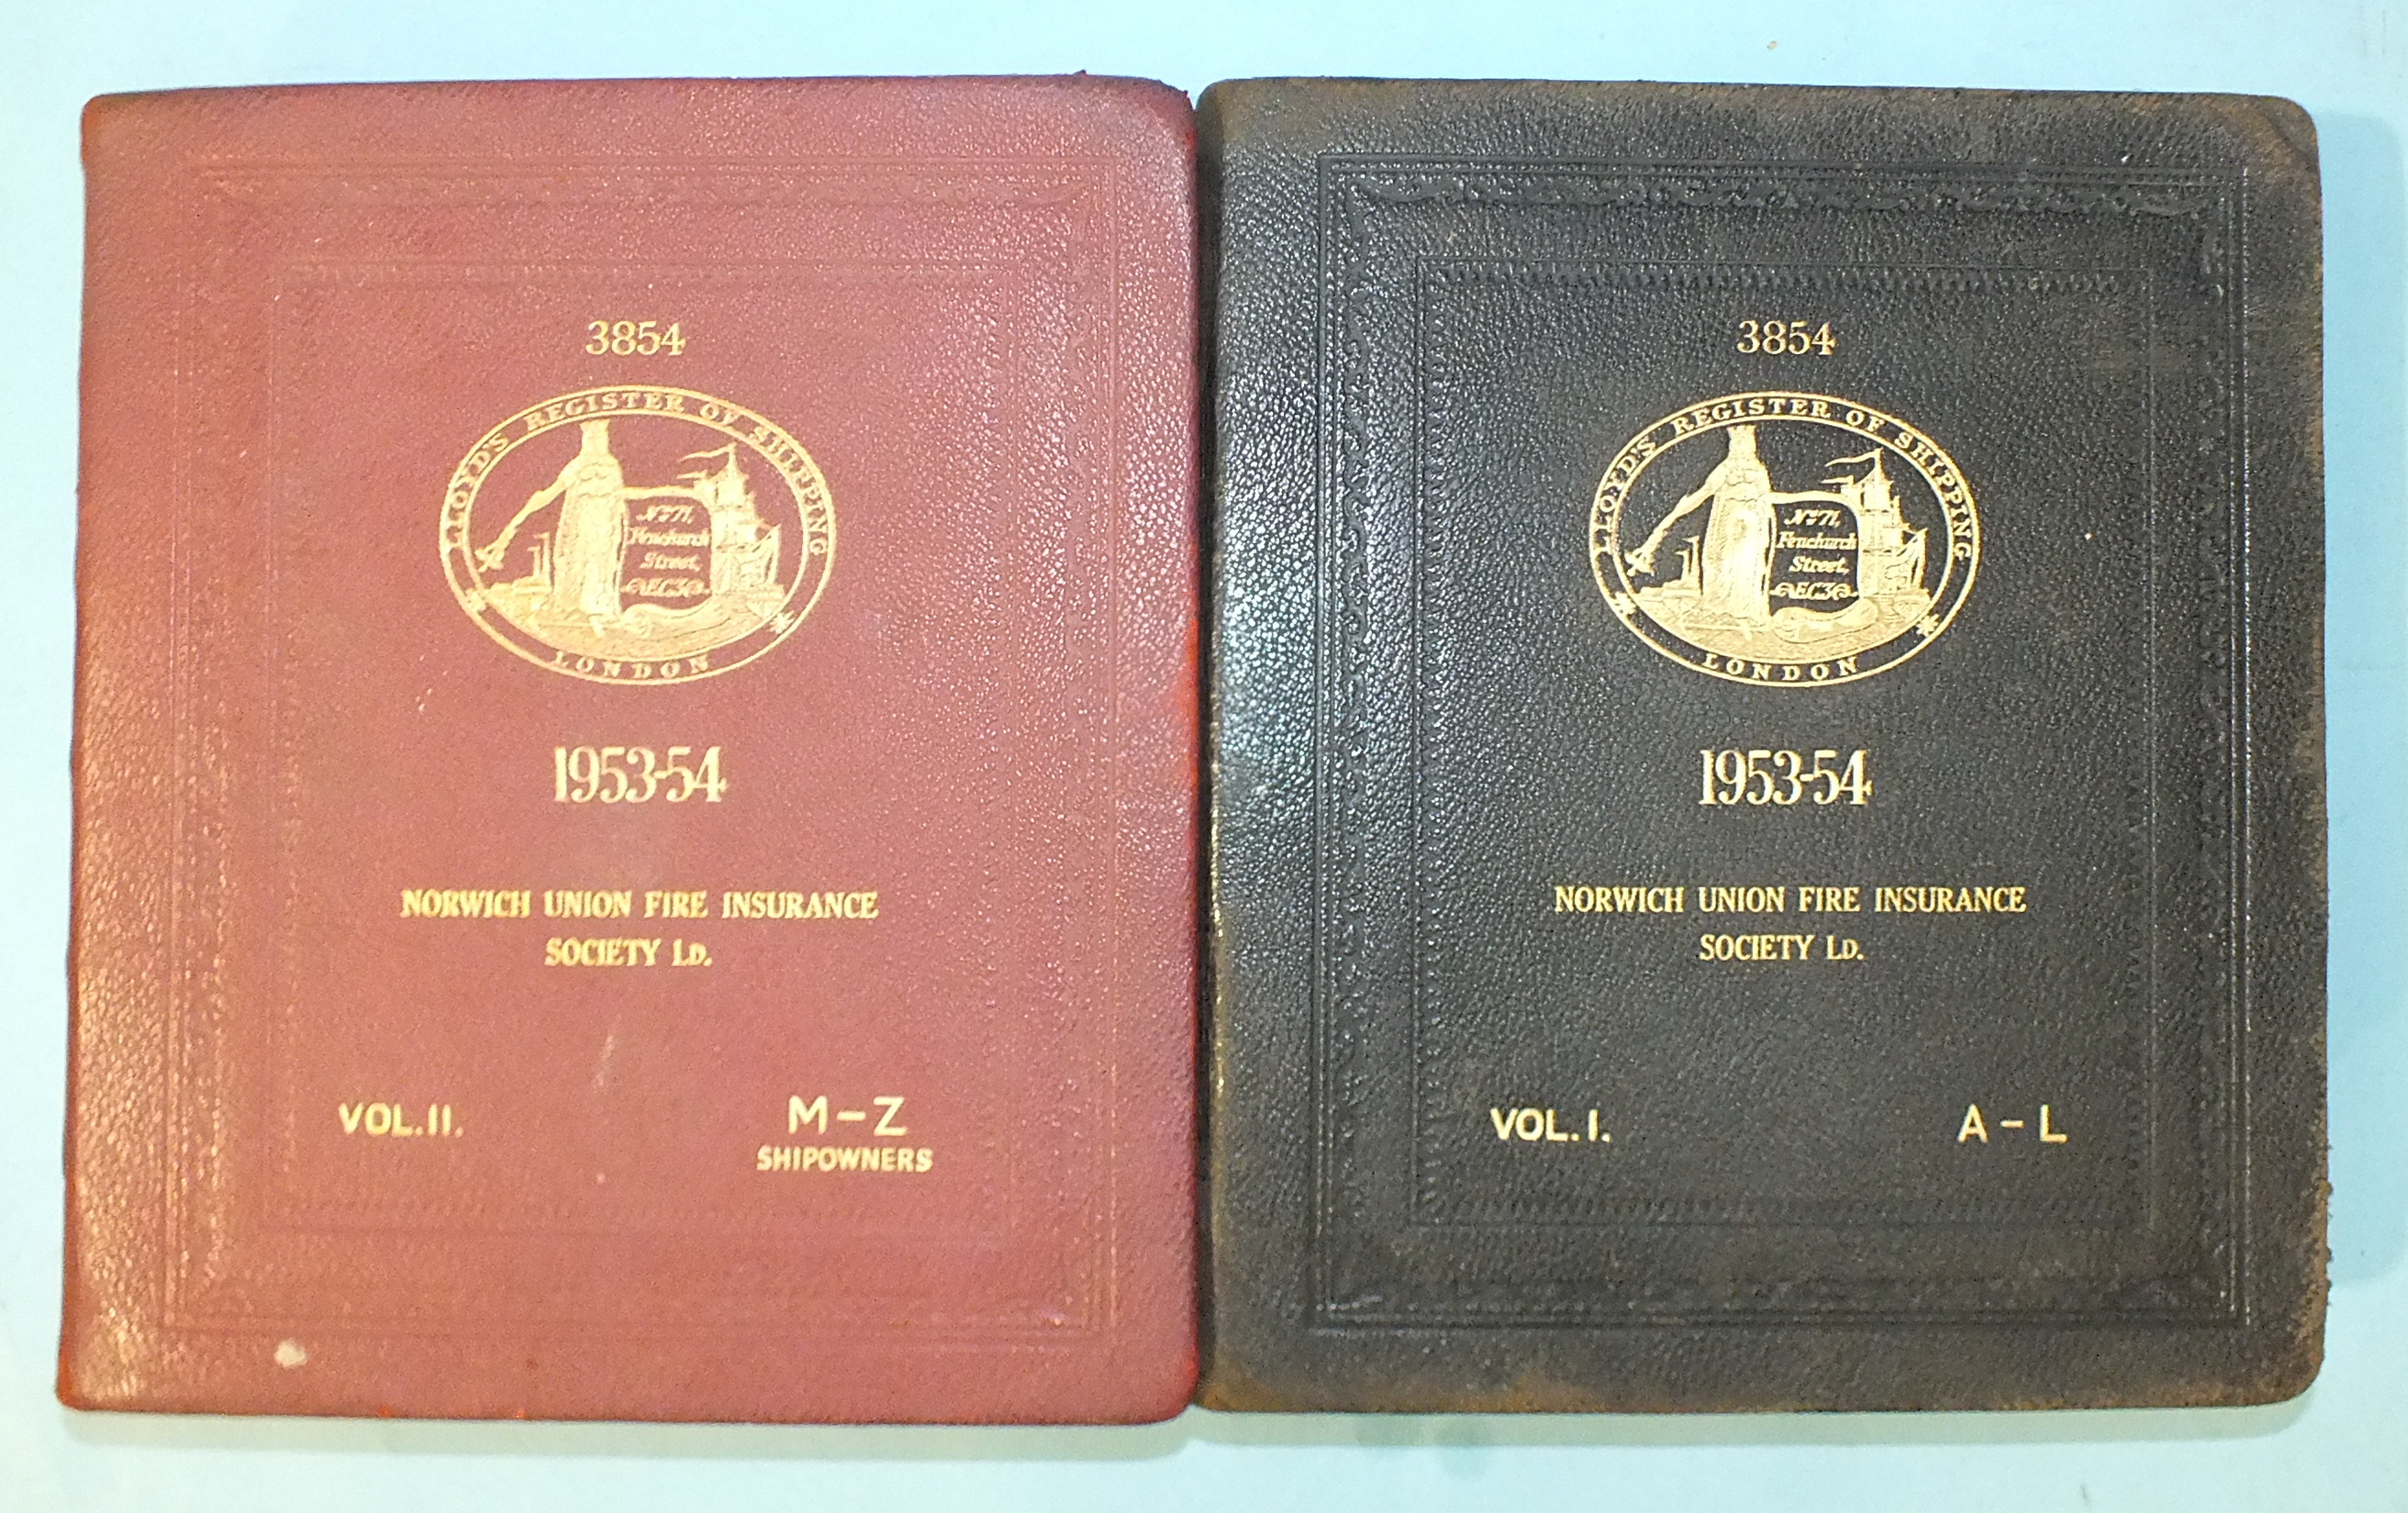 Lloyds Register of Shipping 1953-54, 2 vols, mor gt, 4to, for Norwich Union Fire Insurance Society